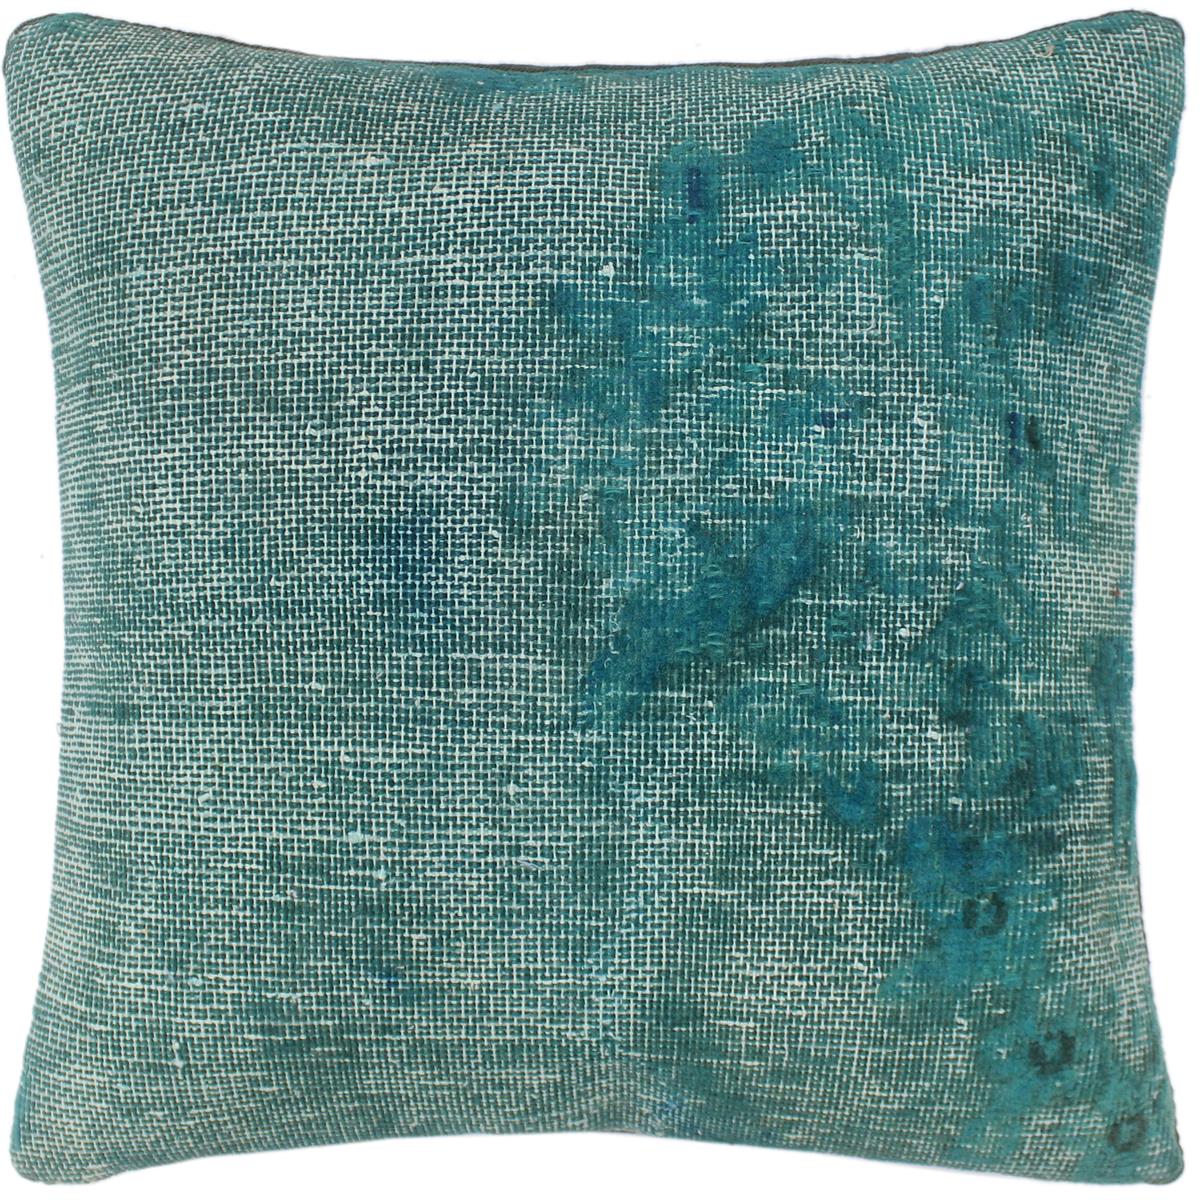 handmade Vintage Pillow Green Blue Hand-Woven SQUARE 100% WOOL Vintage Pillow